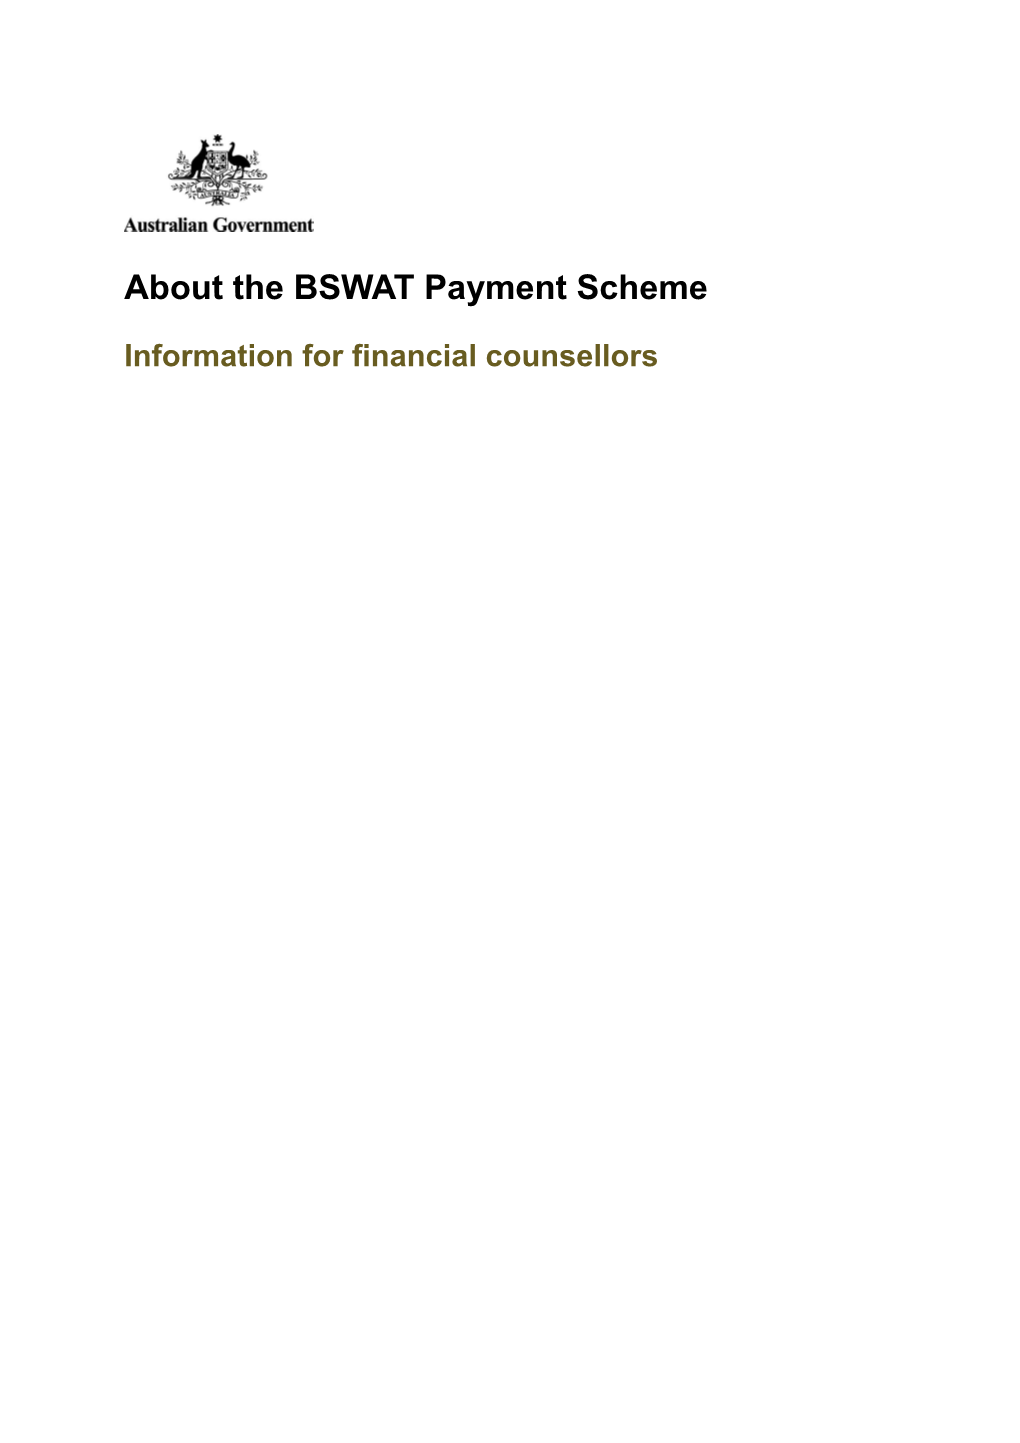 BSWAT Payment Scheme Information for Financial Counsellors